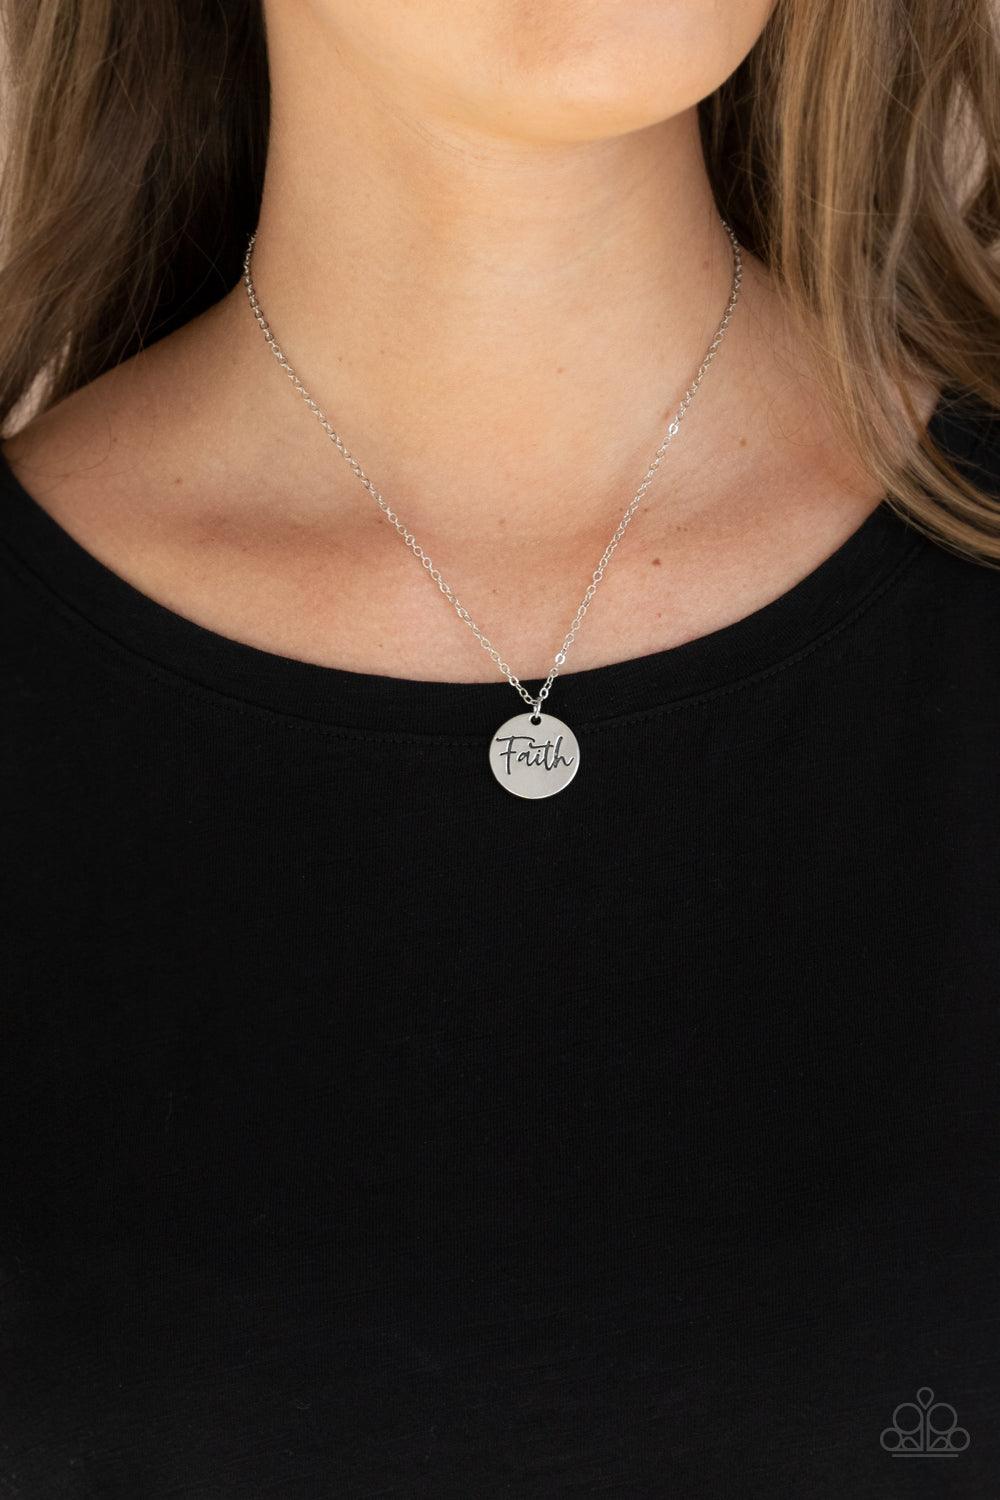 Choose Faith Silver Necklace - Jewelry by Bretta